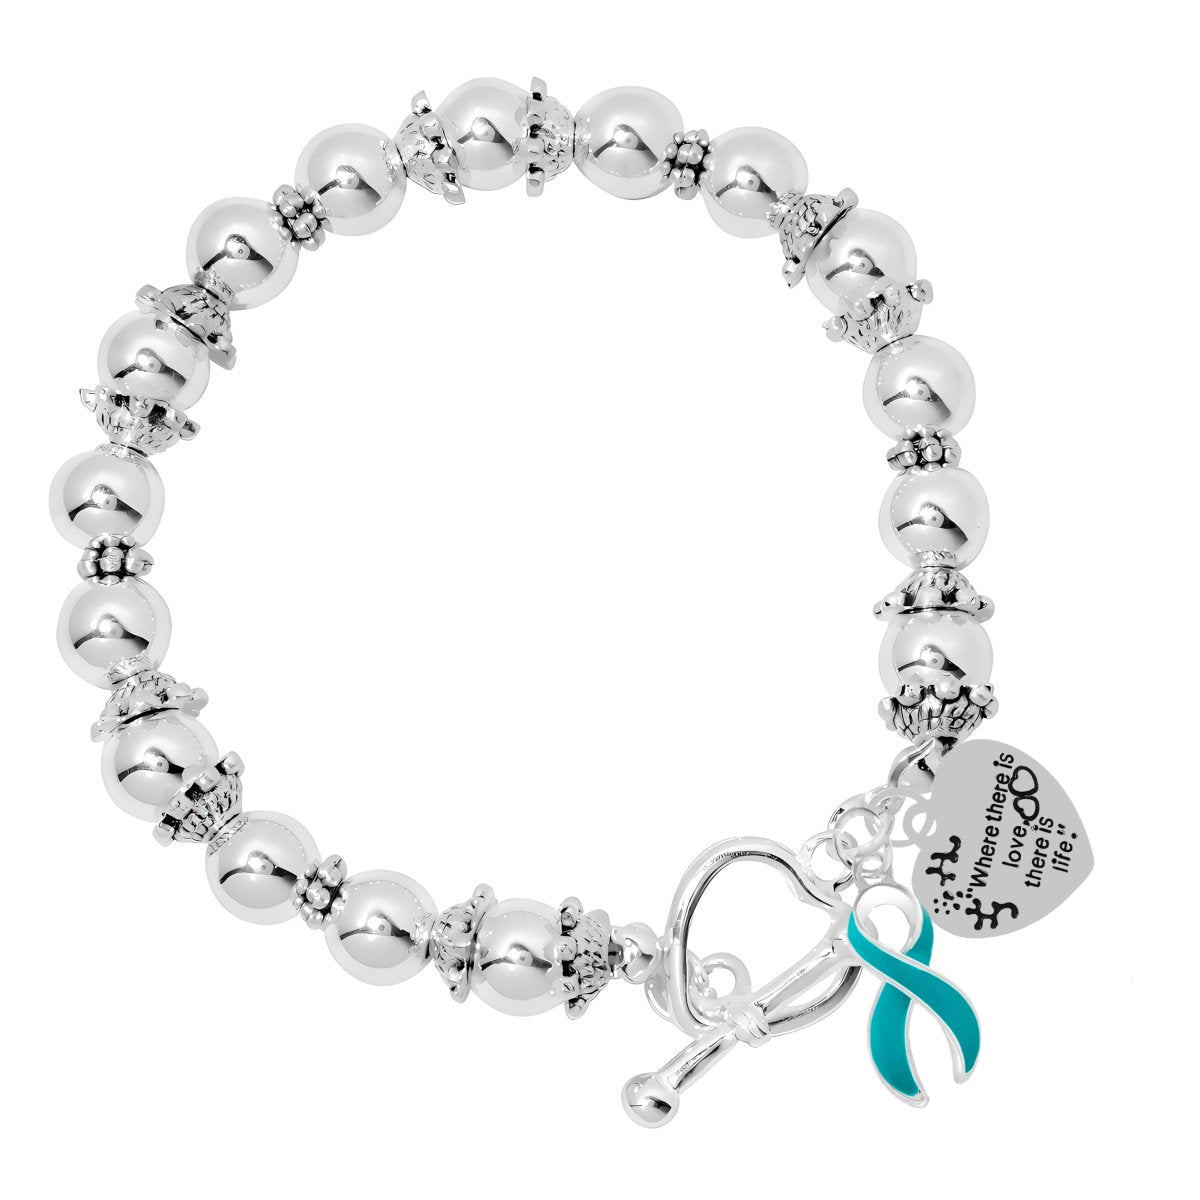 Where There is Love Teal Ribbon Bracelets - Fundraising For A Cause